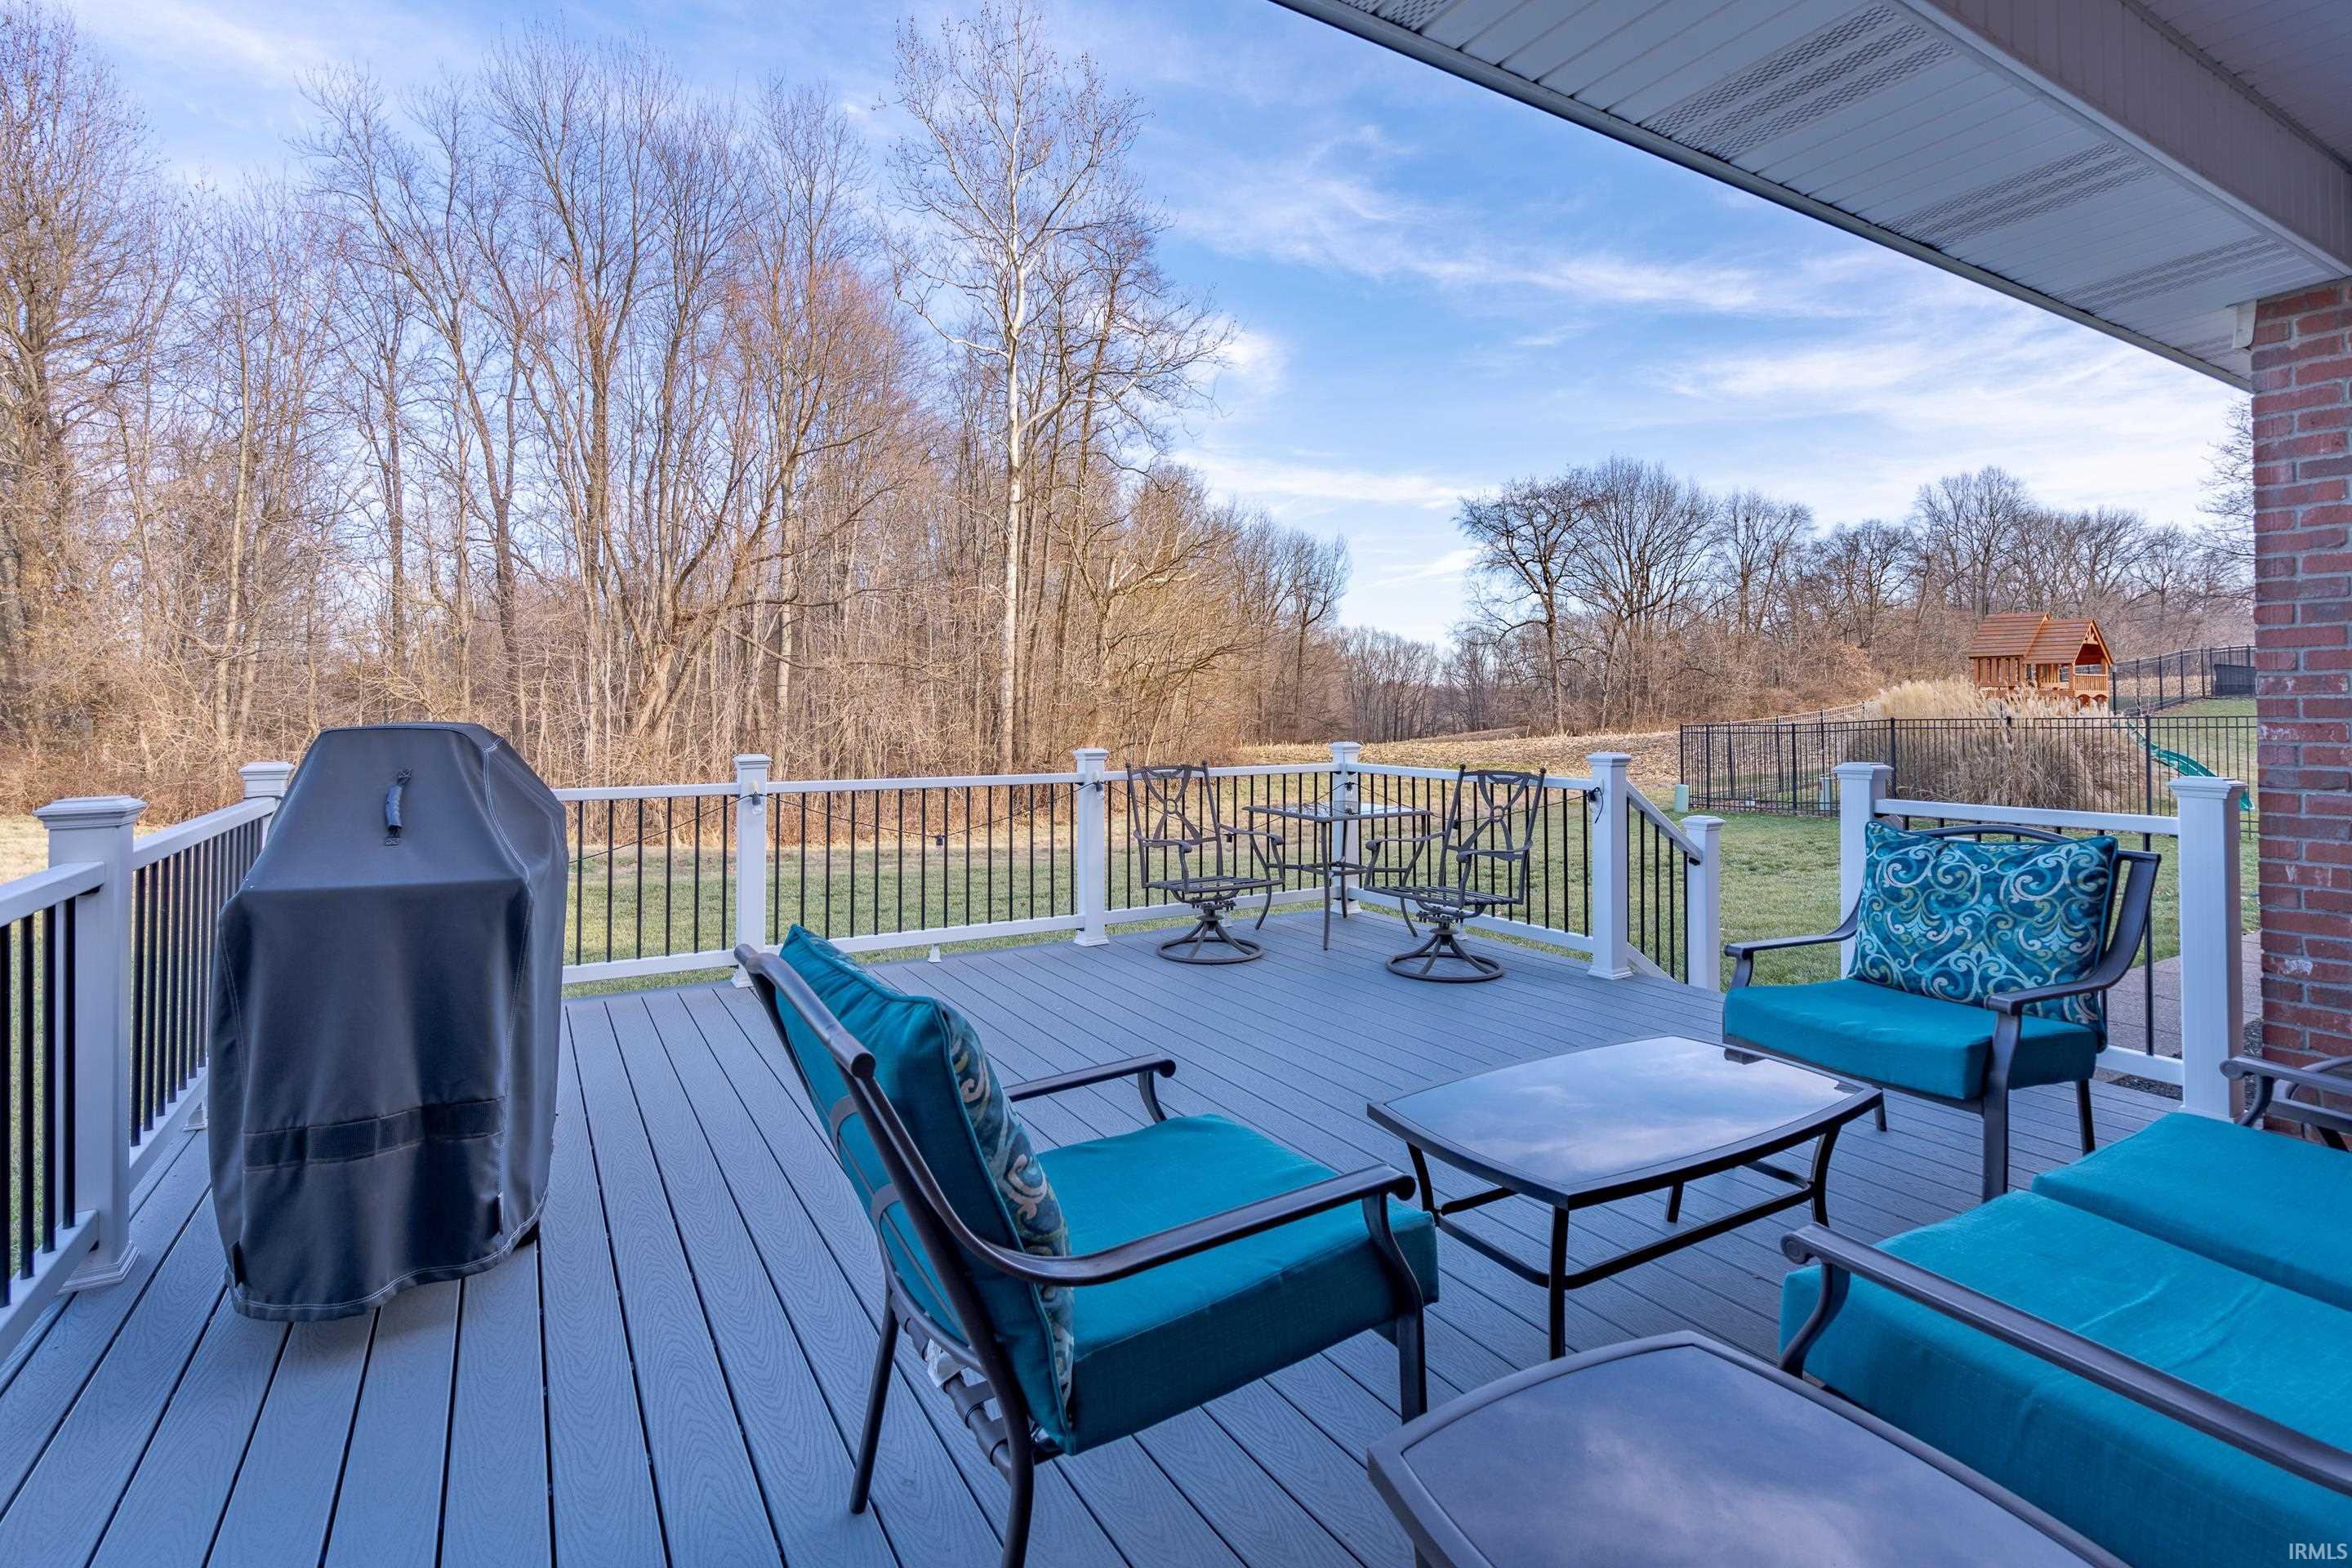 Deck overlooks private backyard with woods behind.